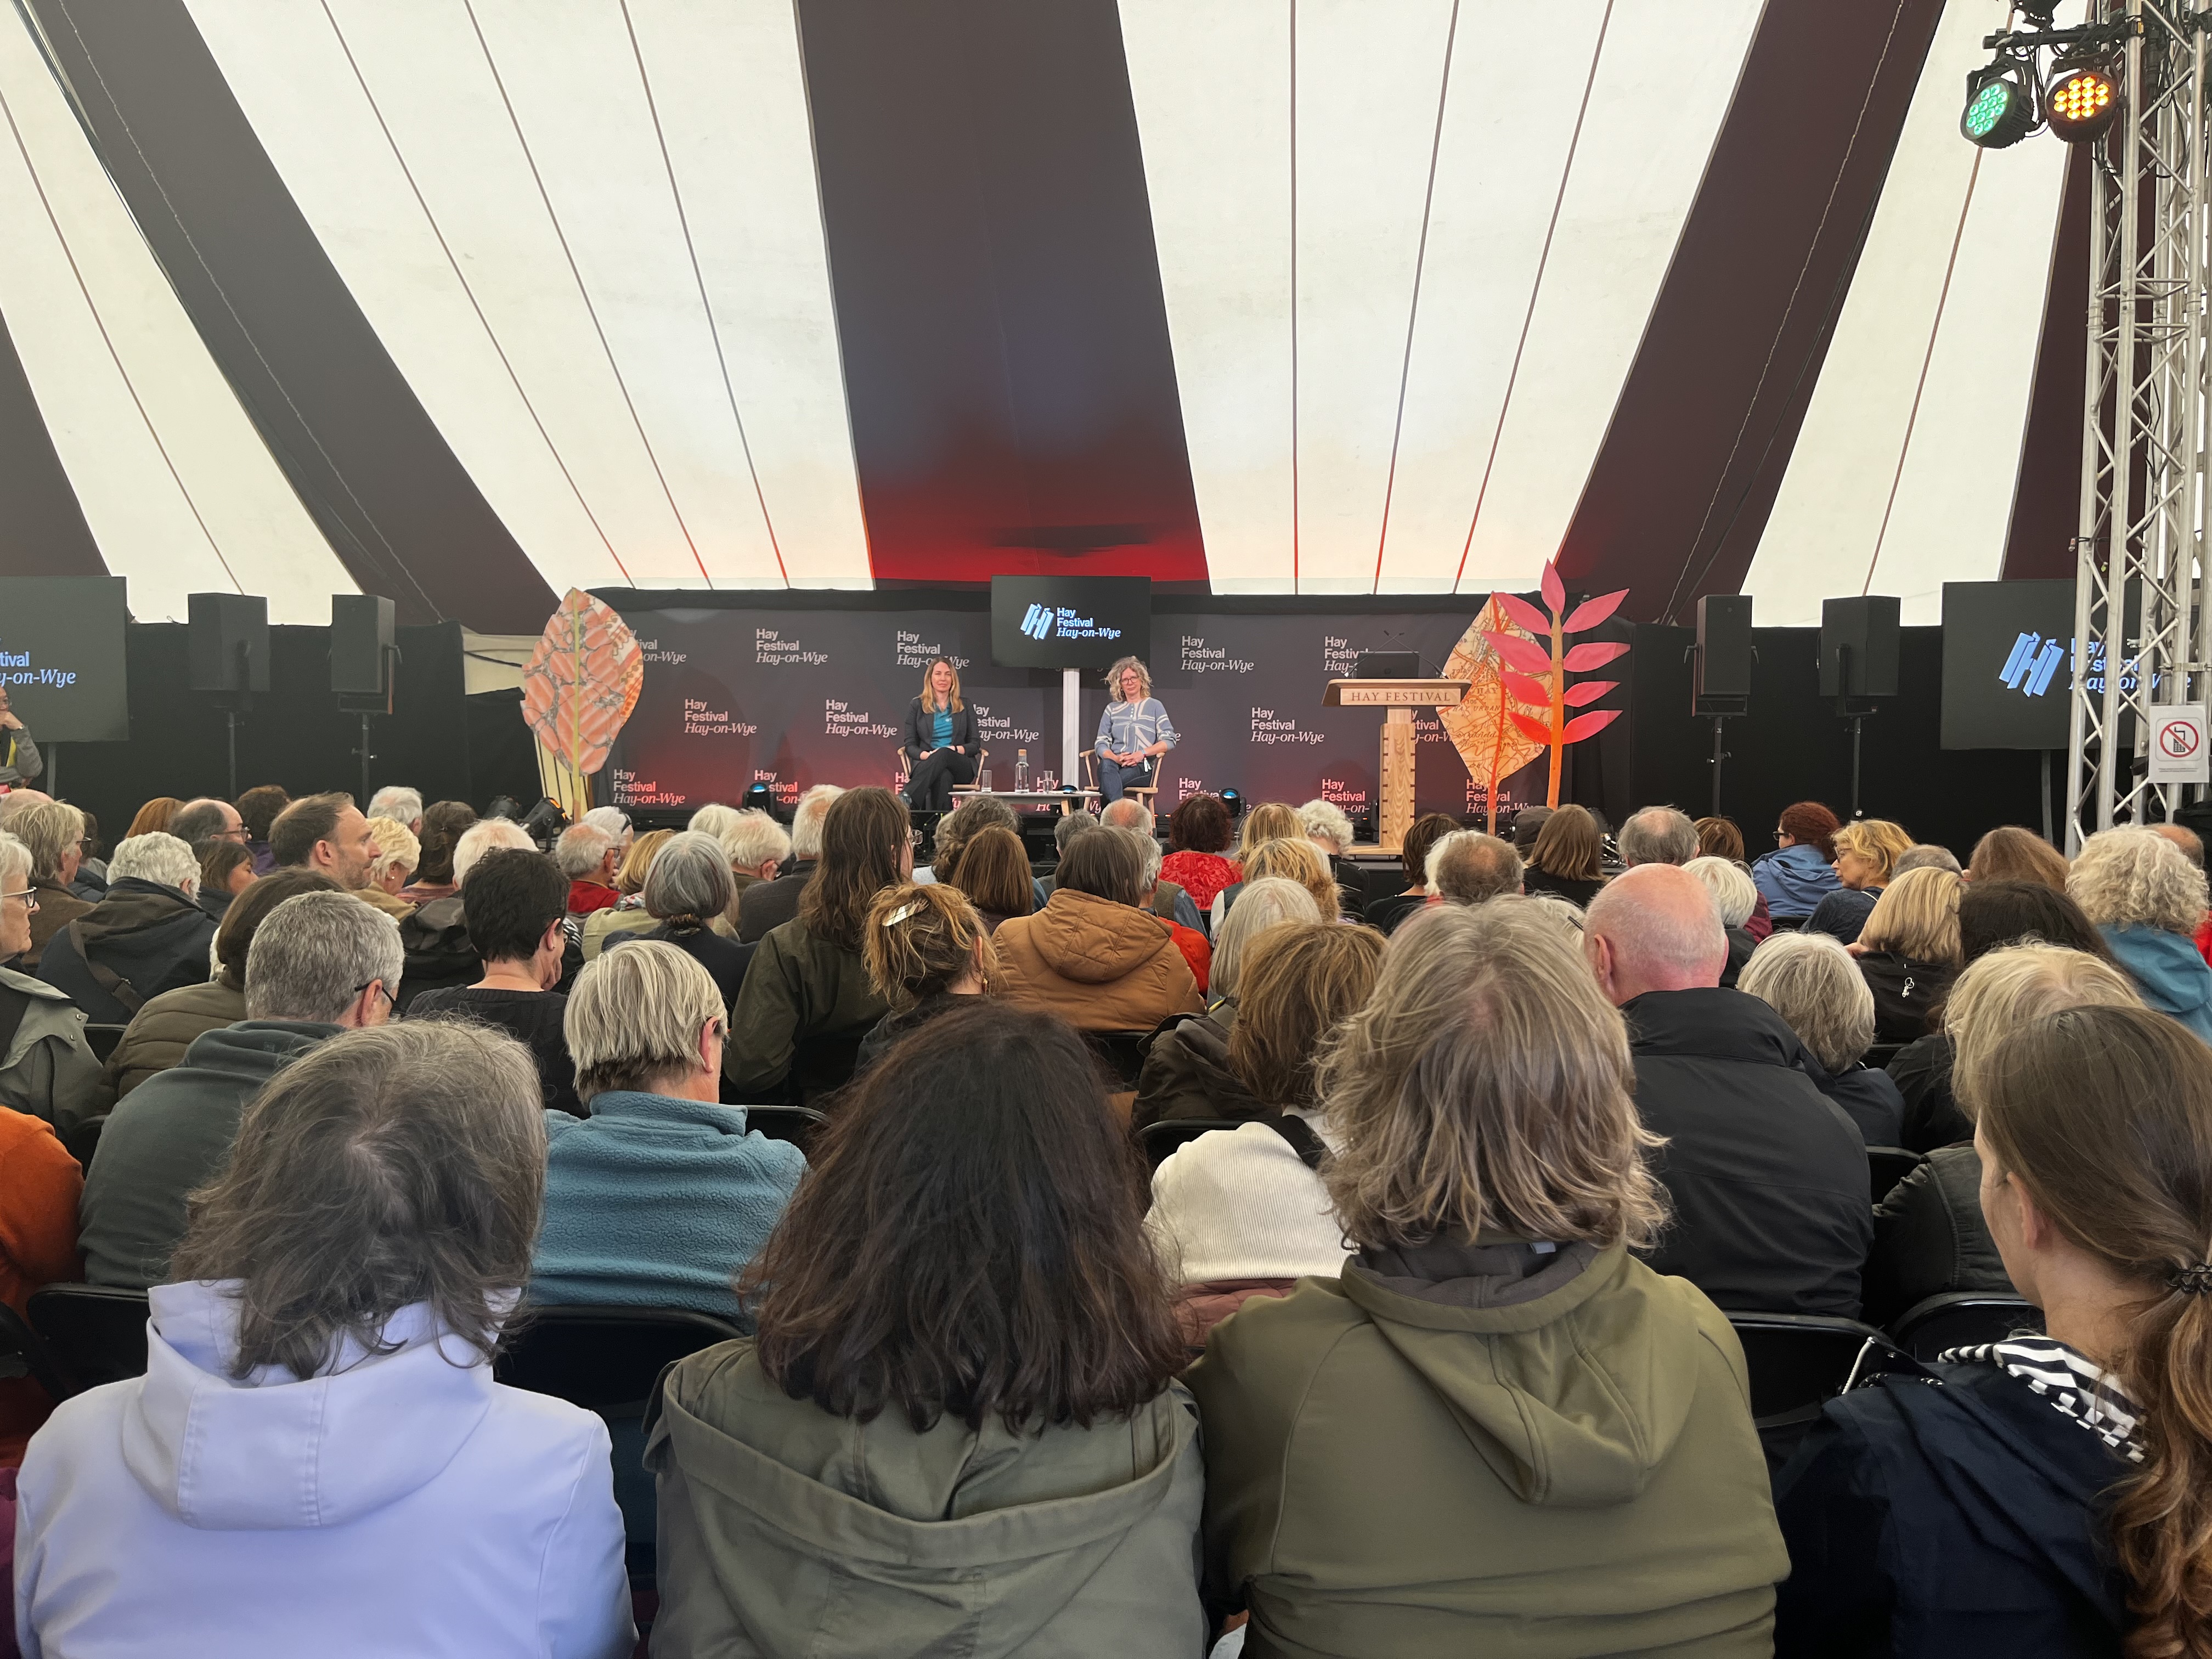 An audience at the Hay Festival listening to Dr Jen Wolowic and Dr Anwen Elias discuss 'Doing Demcracy Differently'